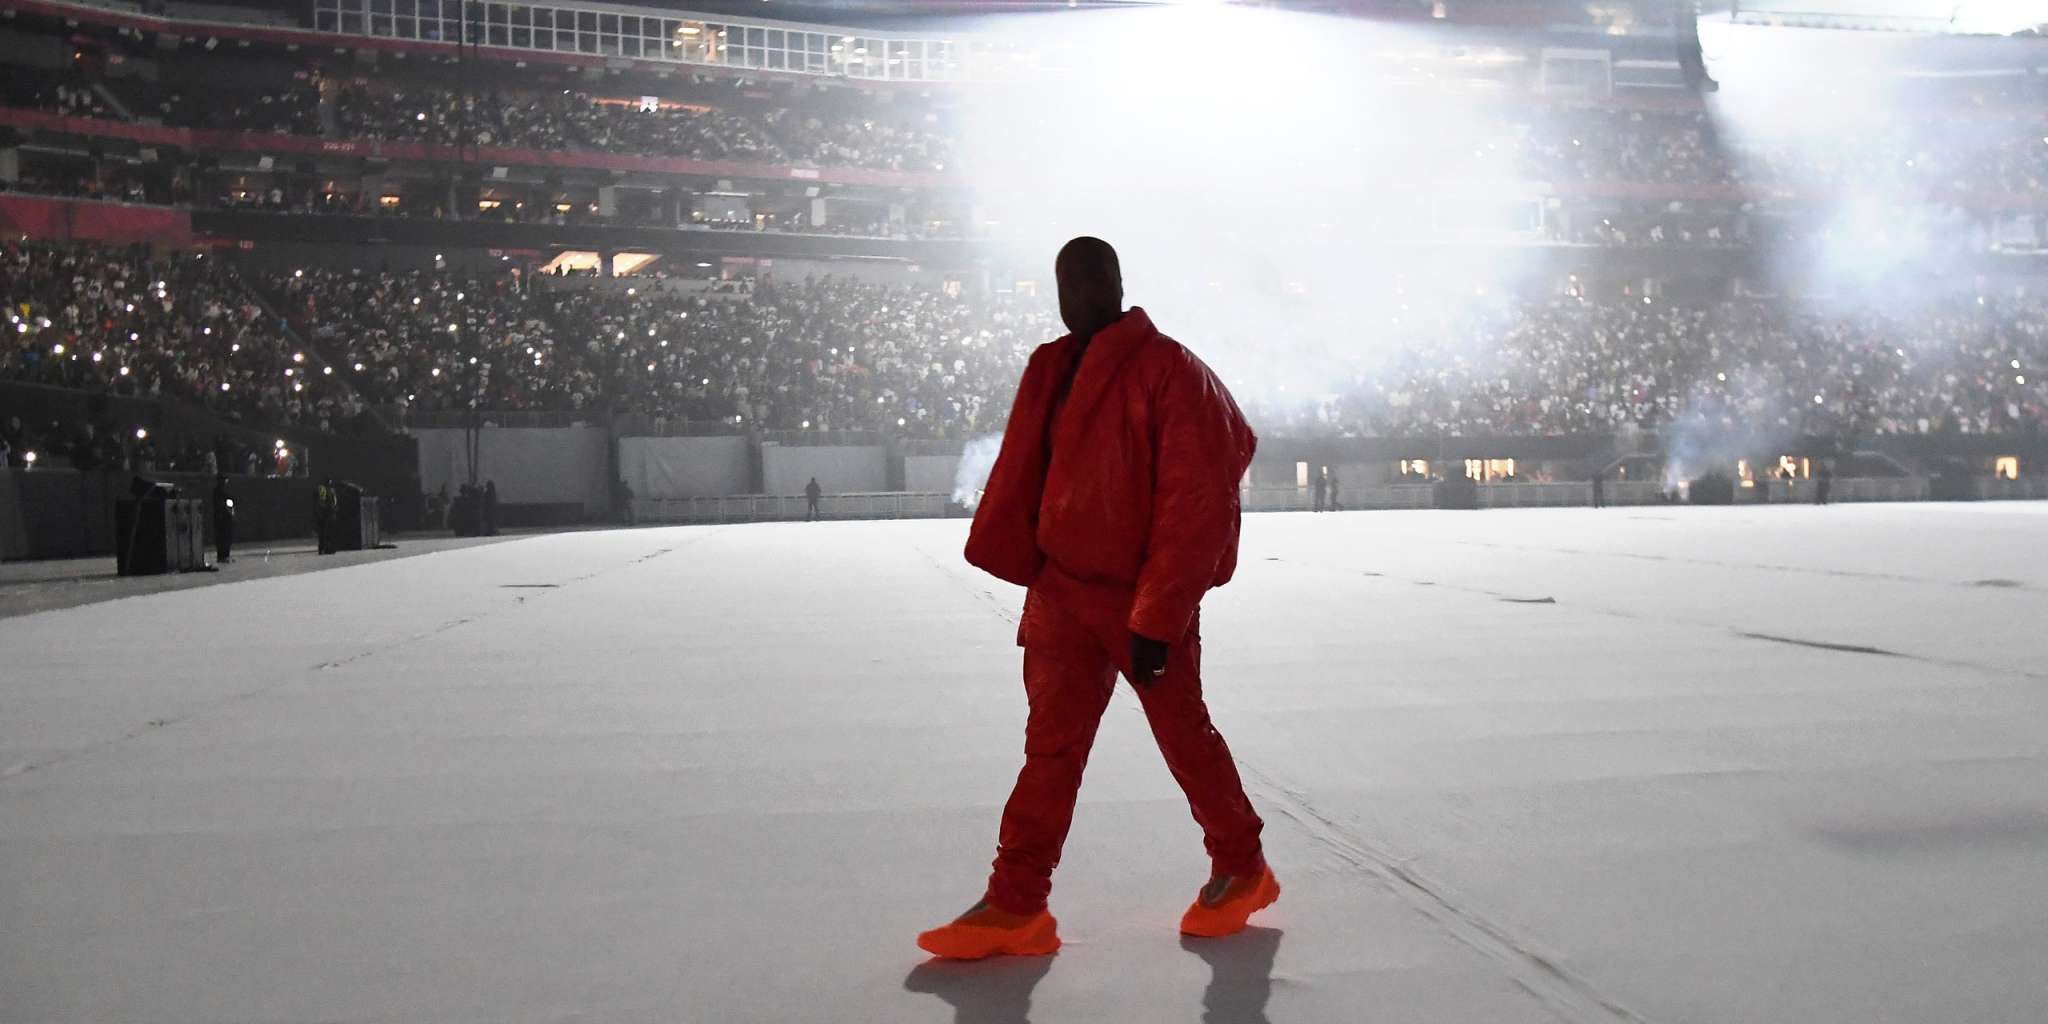 ”kanye-west-breaks-apple-music-live-streaming-record-for-donda”